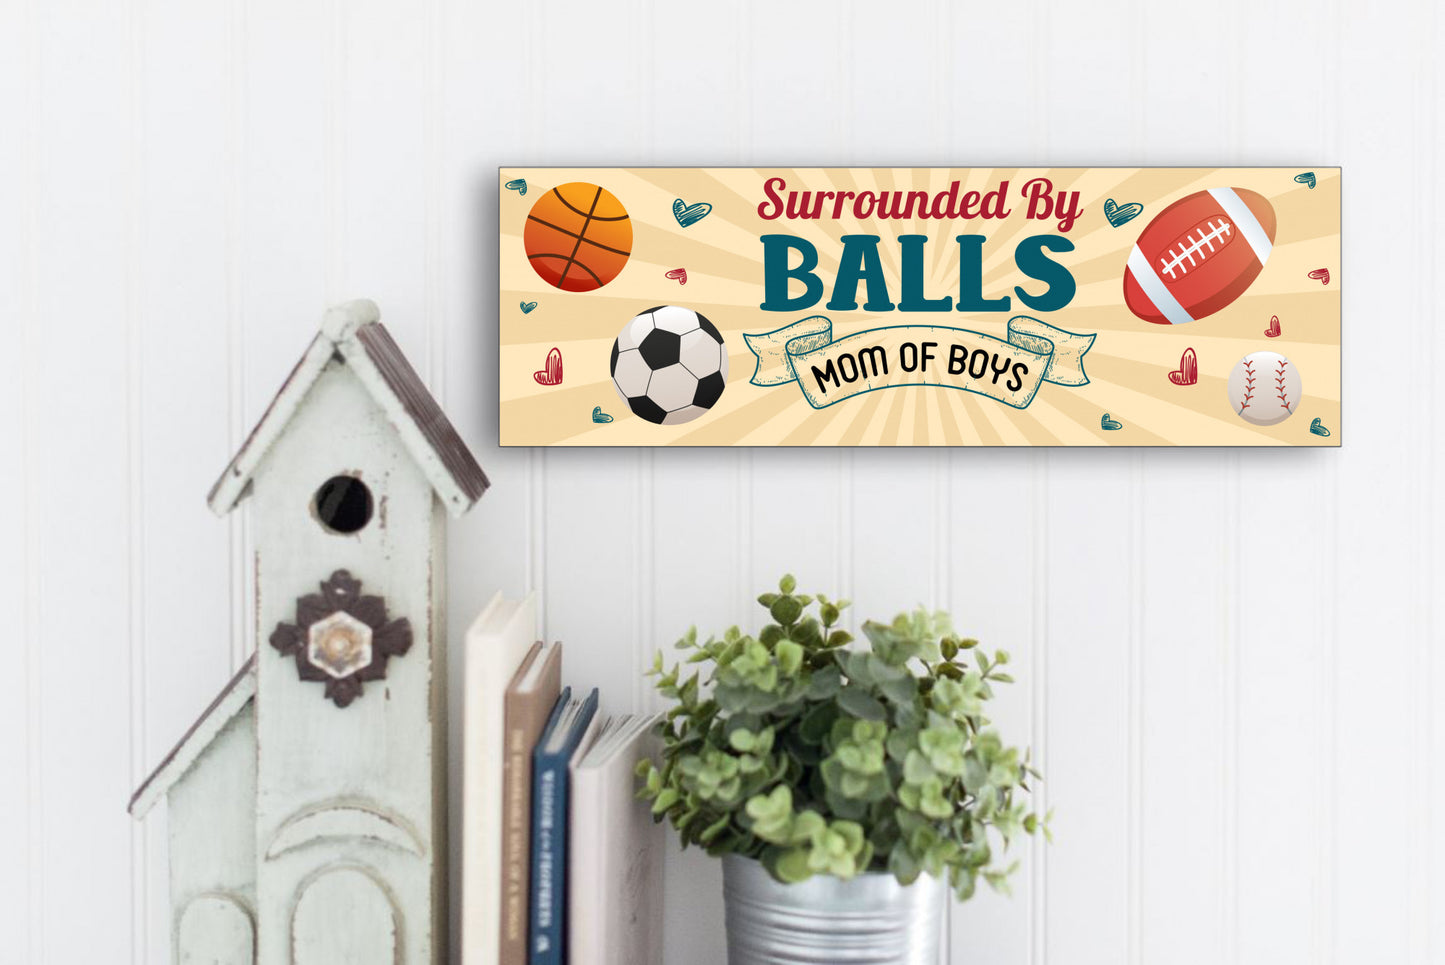 Mom of Boys Sign, Surrounded By Balls, Mom Sign, Mother's Day Gift, Christmas Gift for Mom